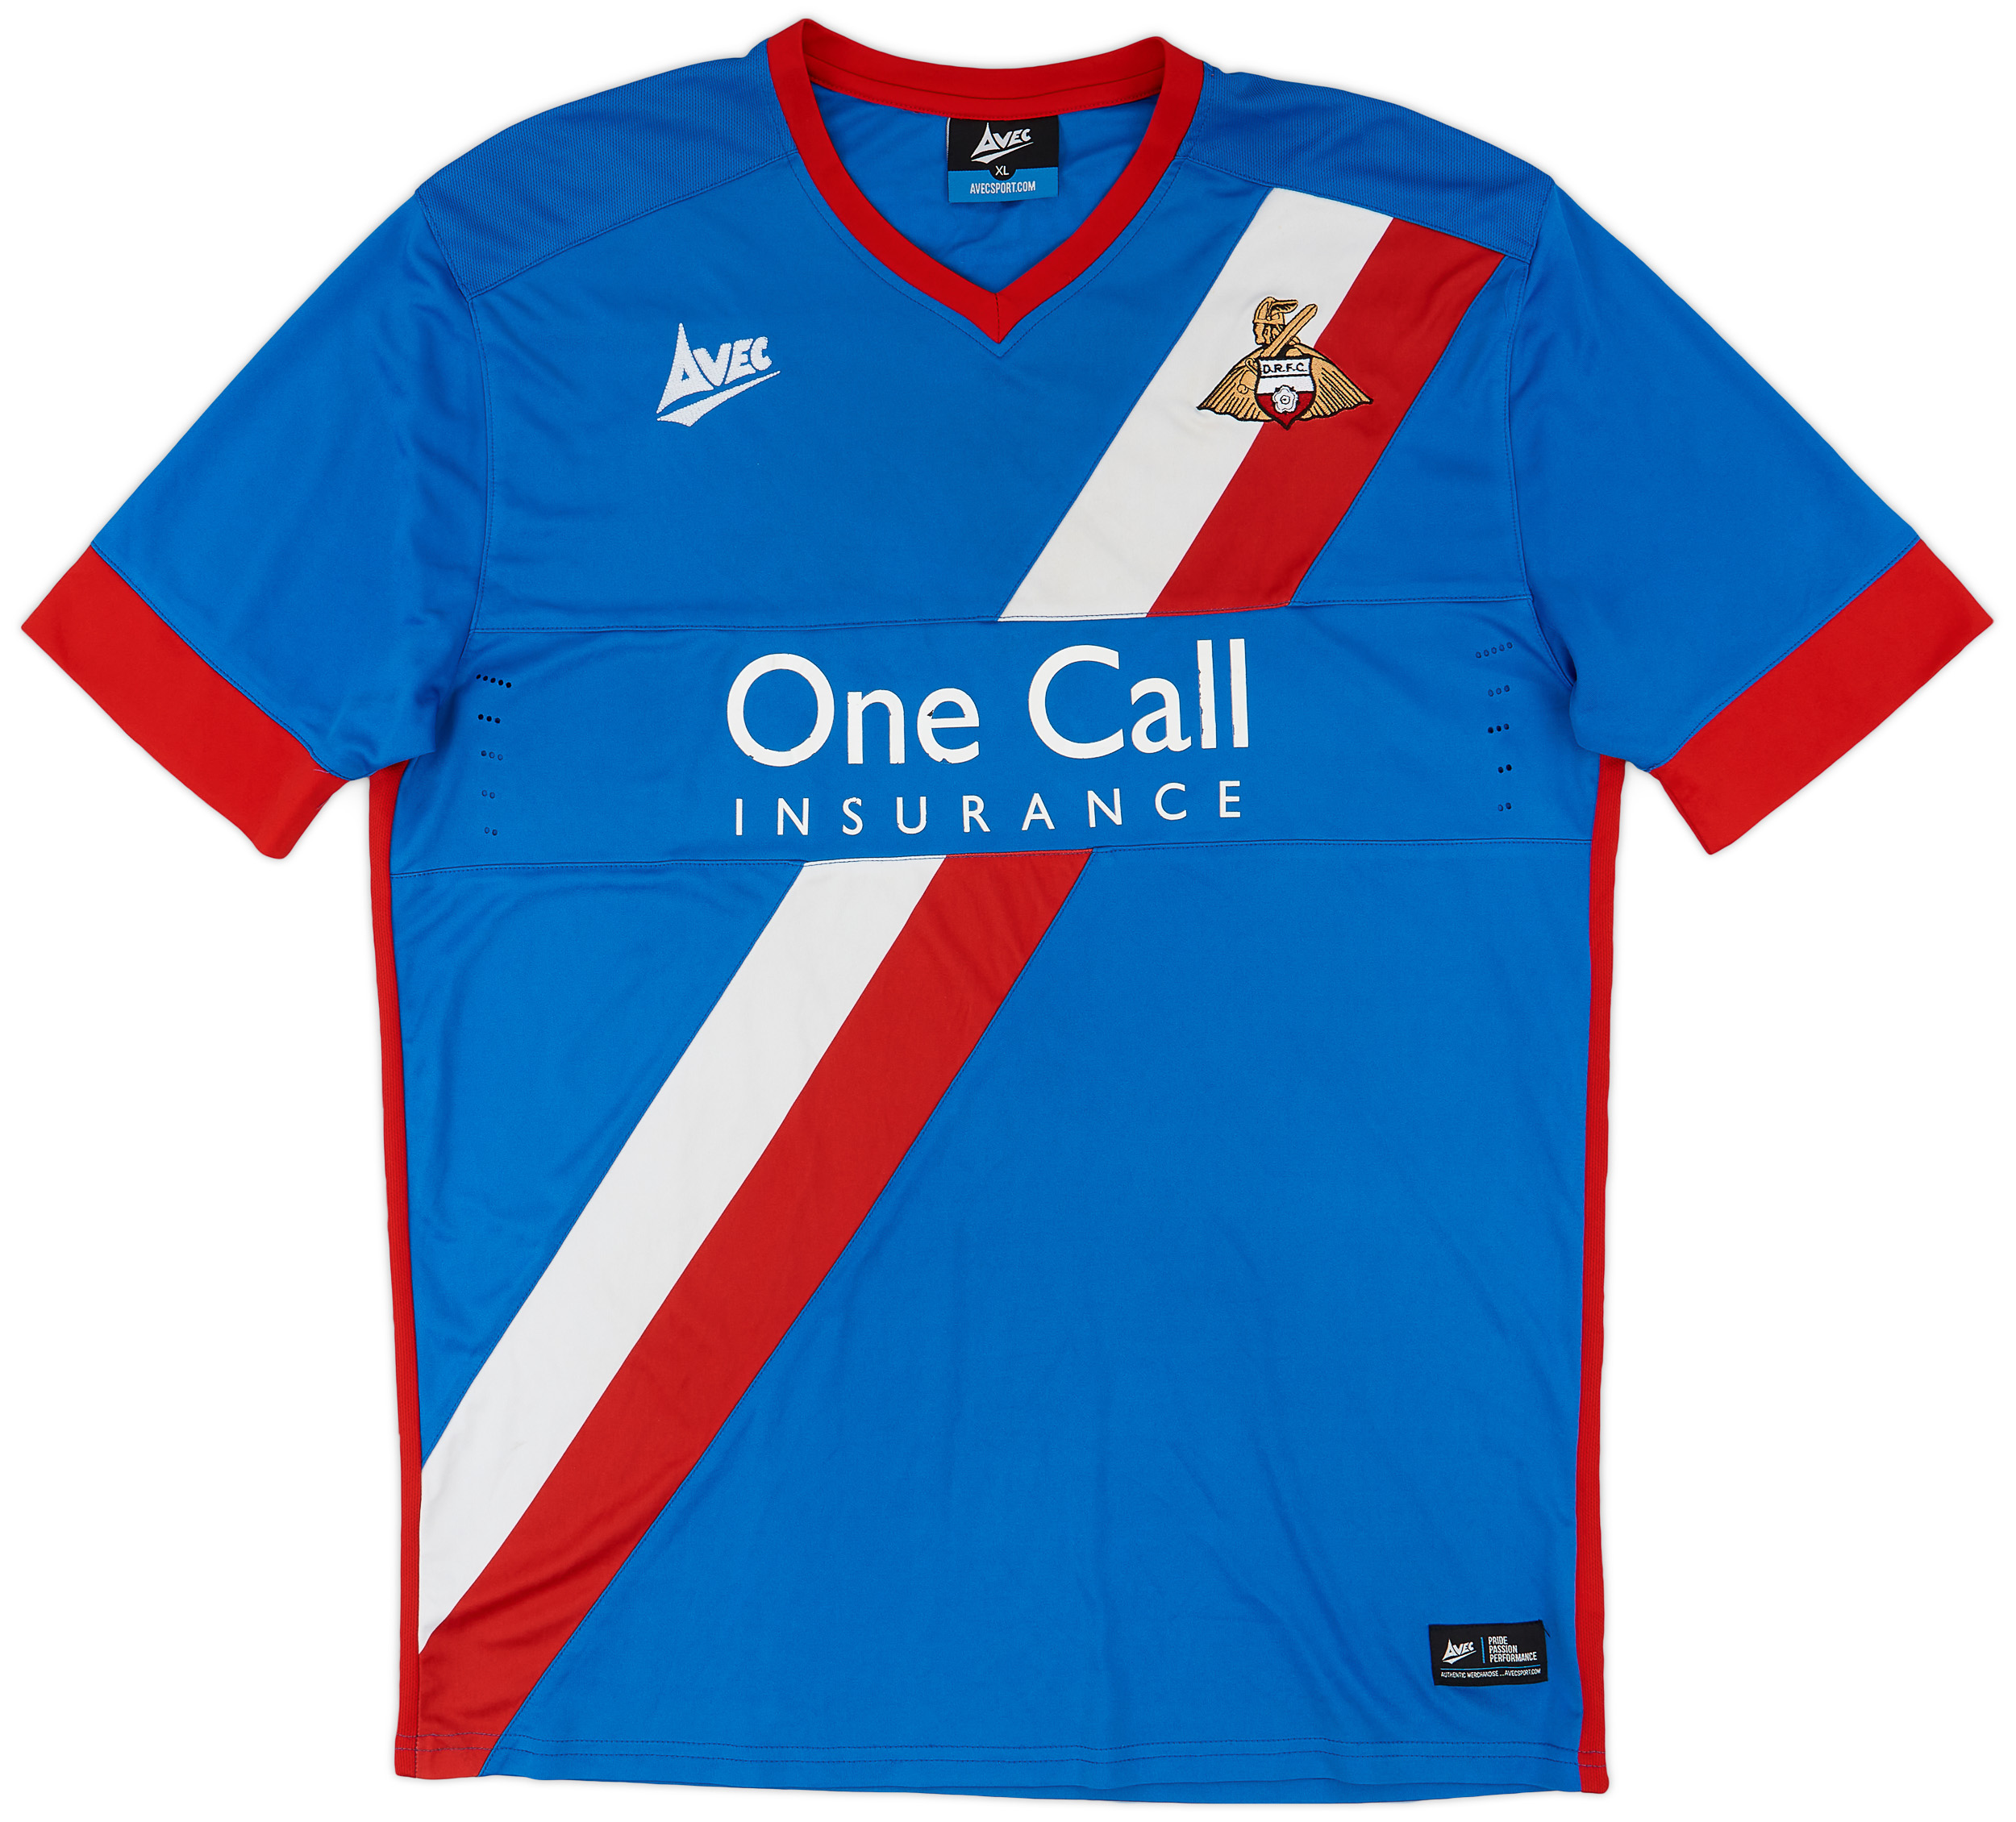 2014-15 Doncaster Rovers Away Shirt - 6/10 - ()